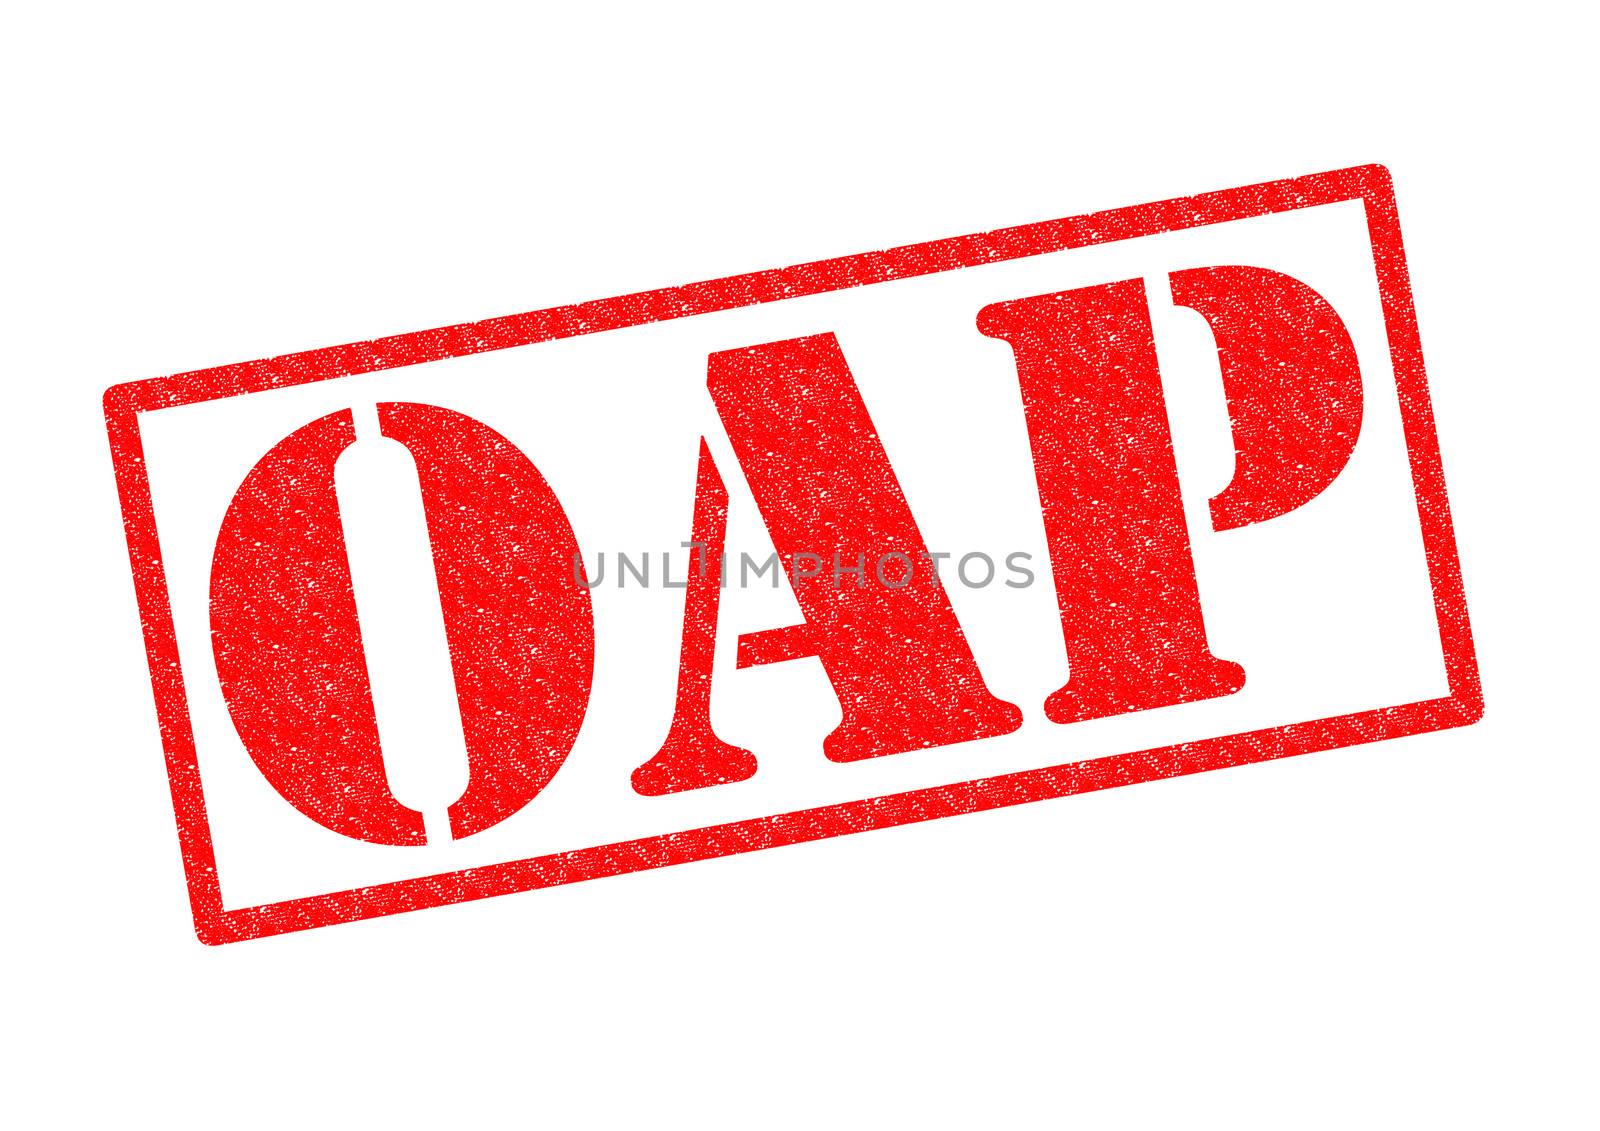 OAP red Rubber Stamp over a white background.